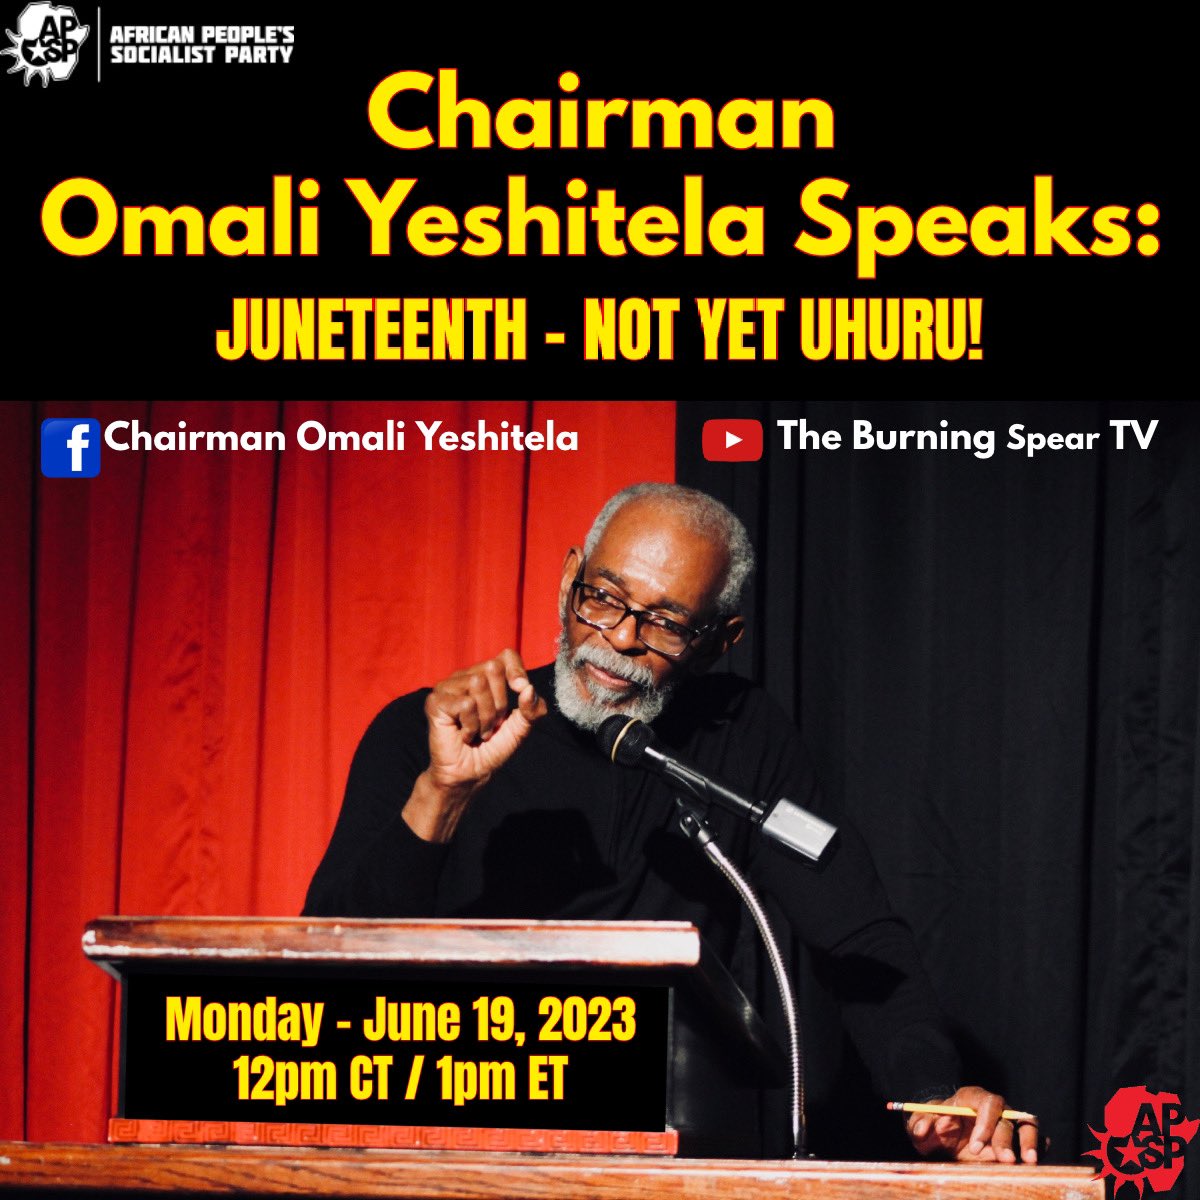 Uhuru!

I will be LIVE for a special Chairman Omali Yeshitela Speaks broadcast, titled “Juneteenth - Not Yet Uhuru!”

Monday, June 19, 2023 @ 12pm CT / 1pm ET (via the links below).

#OmaliYeshitela #ChairmanOmaliYeshitela #Juneteenth #NotYetUhuru #HandsOffUhuru #HandsOffAfrica